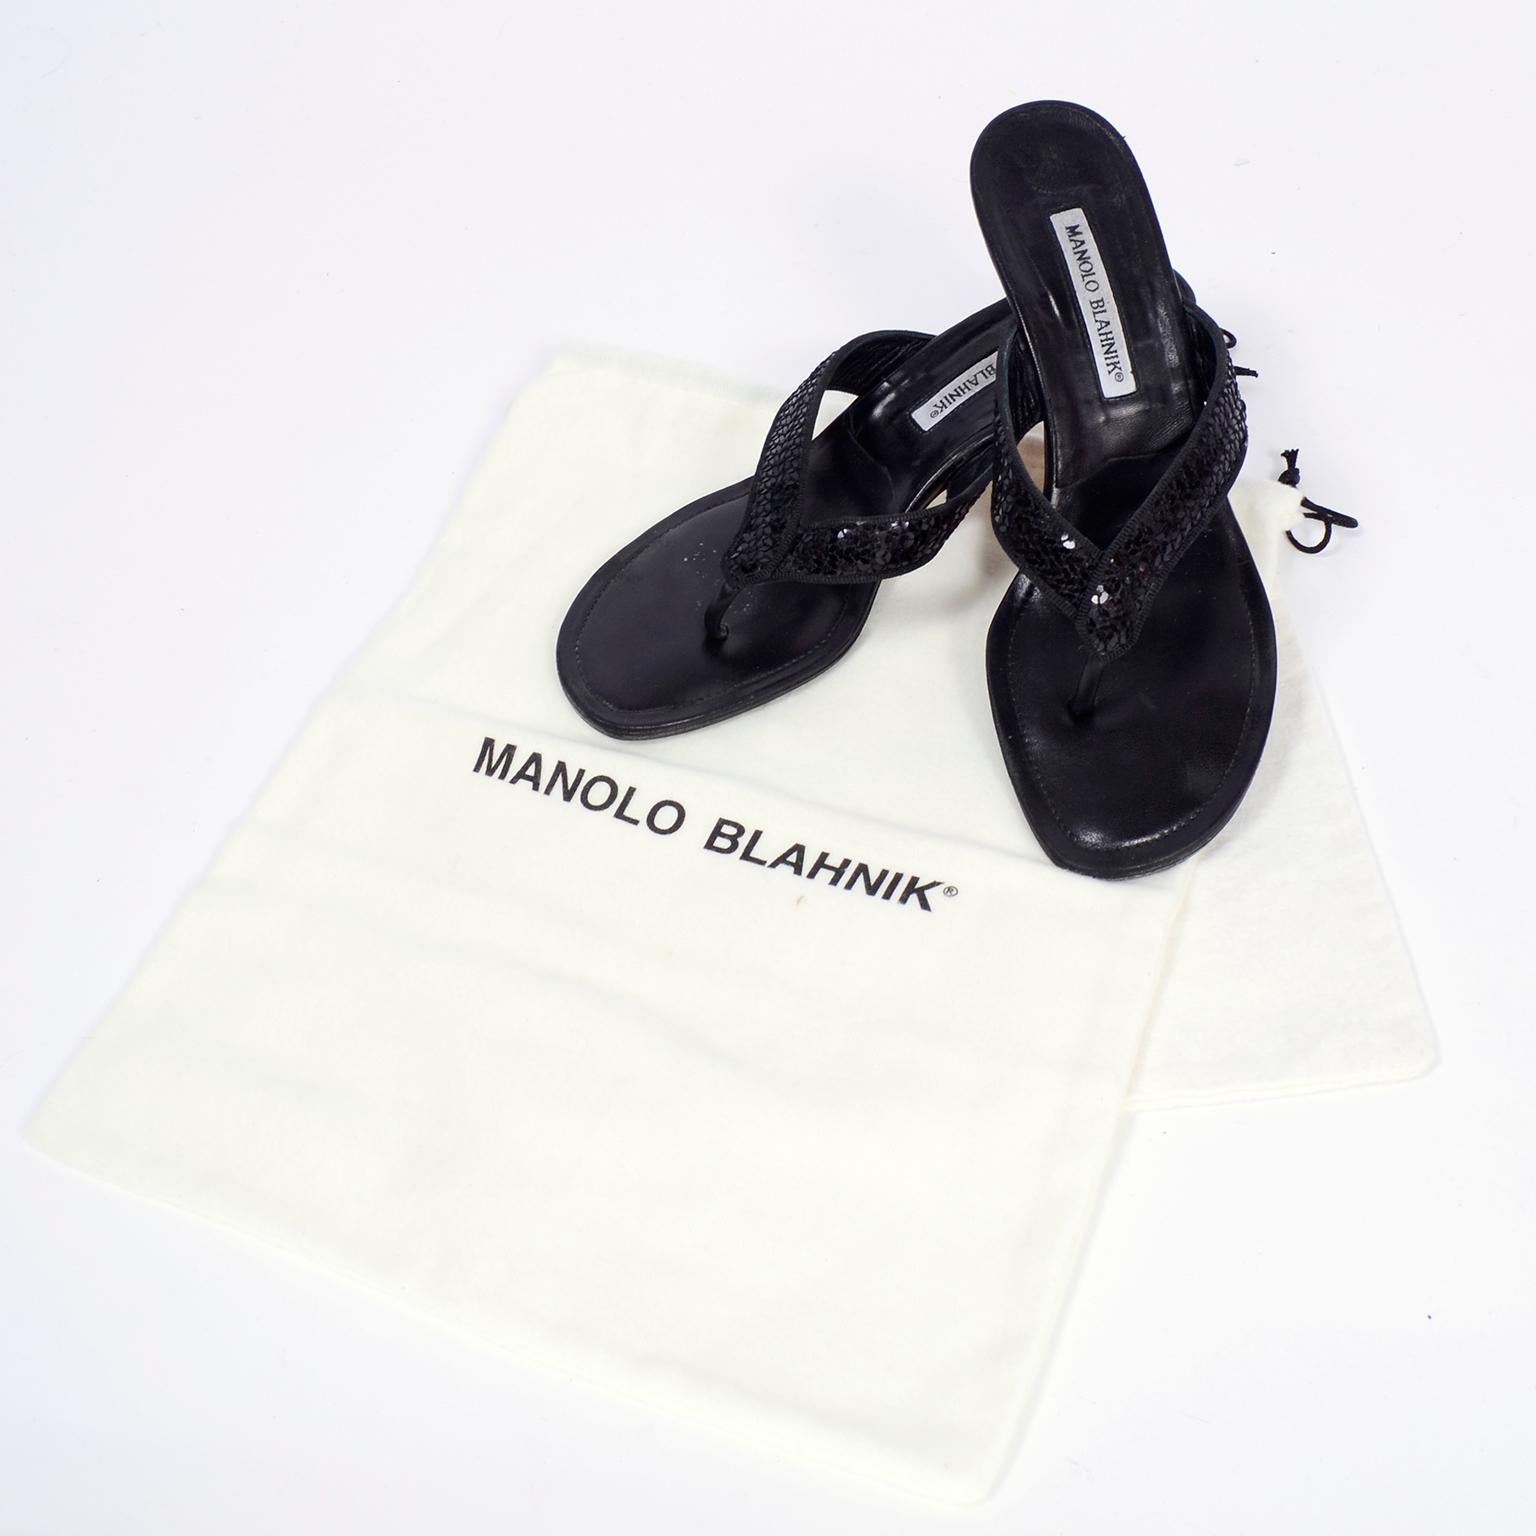 We love Manolo Blahnik, and these black leather low heel thong sandals are another reason to admire the designer!  They could just be ordinary thong sandals, but nothing is ever ordinary with Blahnik, so he embellished them with black sequins across